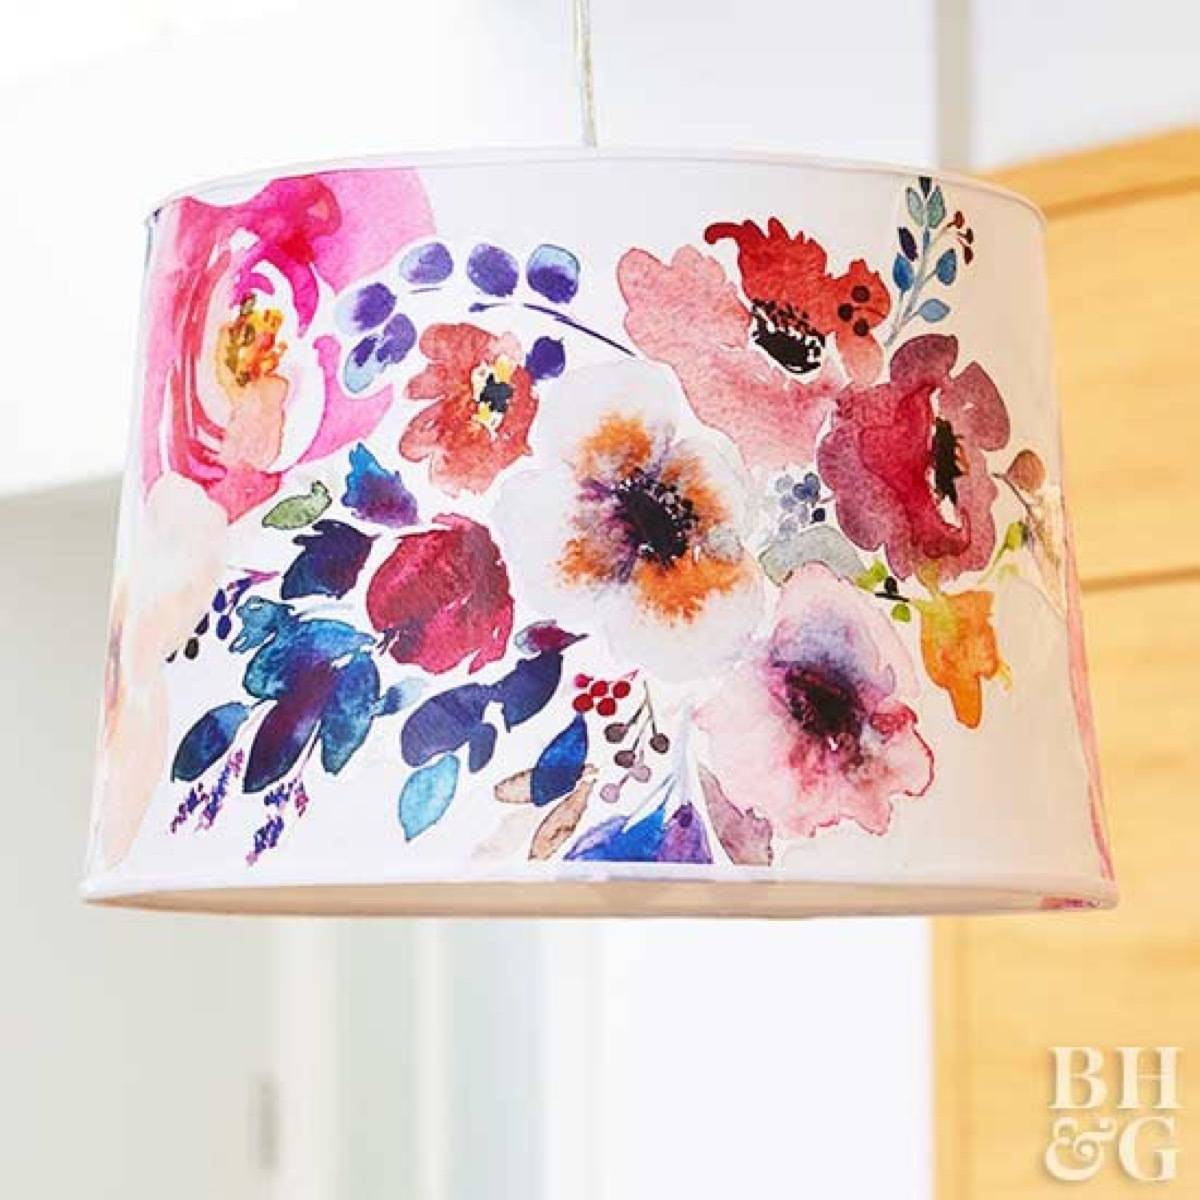 99 ways to use fabric to decorate your home | Decoupaged lampshade